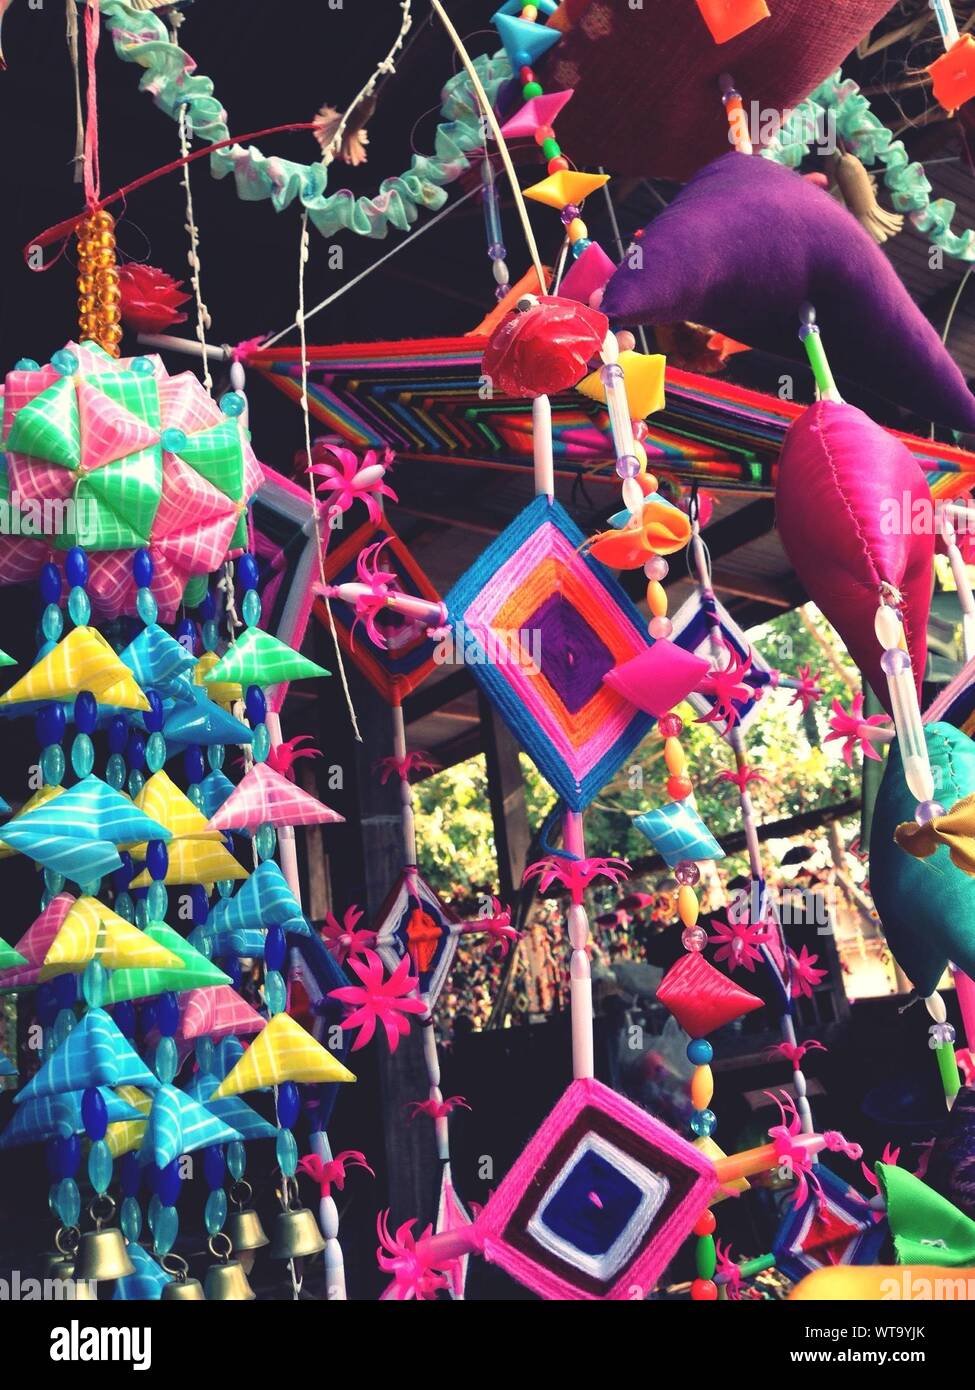 Handcraft Decorations Hanging At Market Stall For Sale Stock Photo